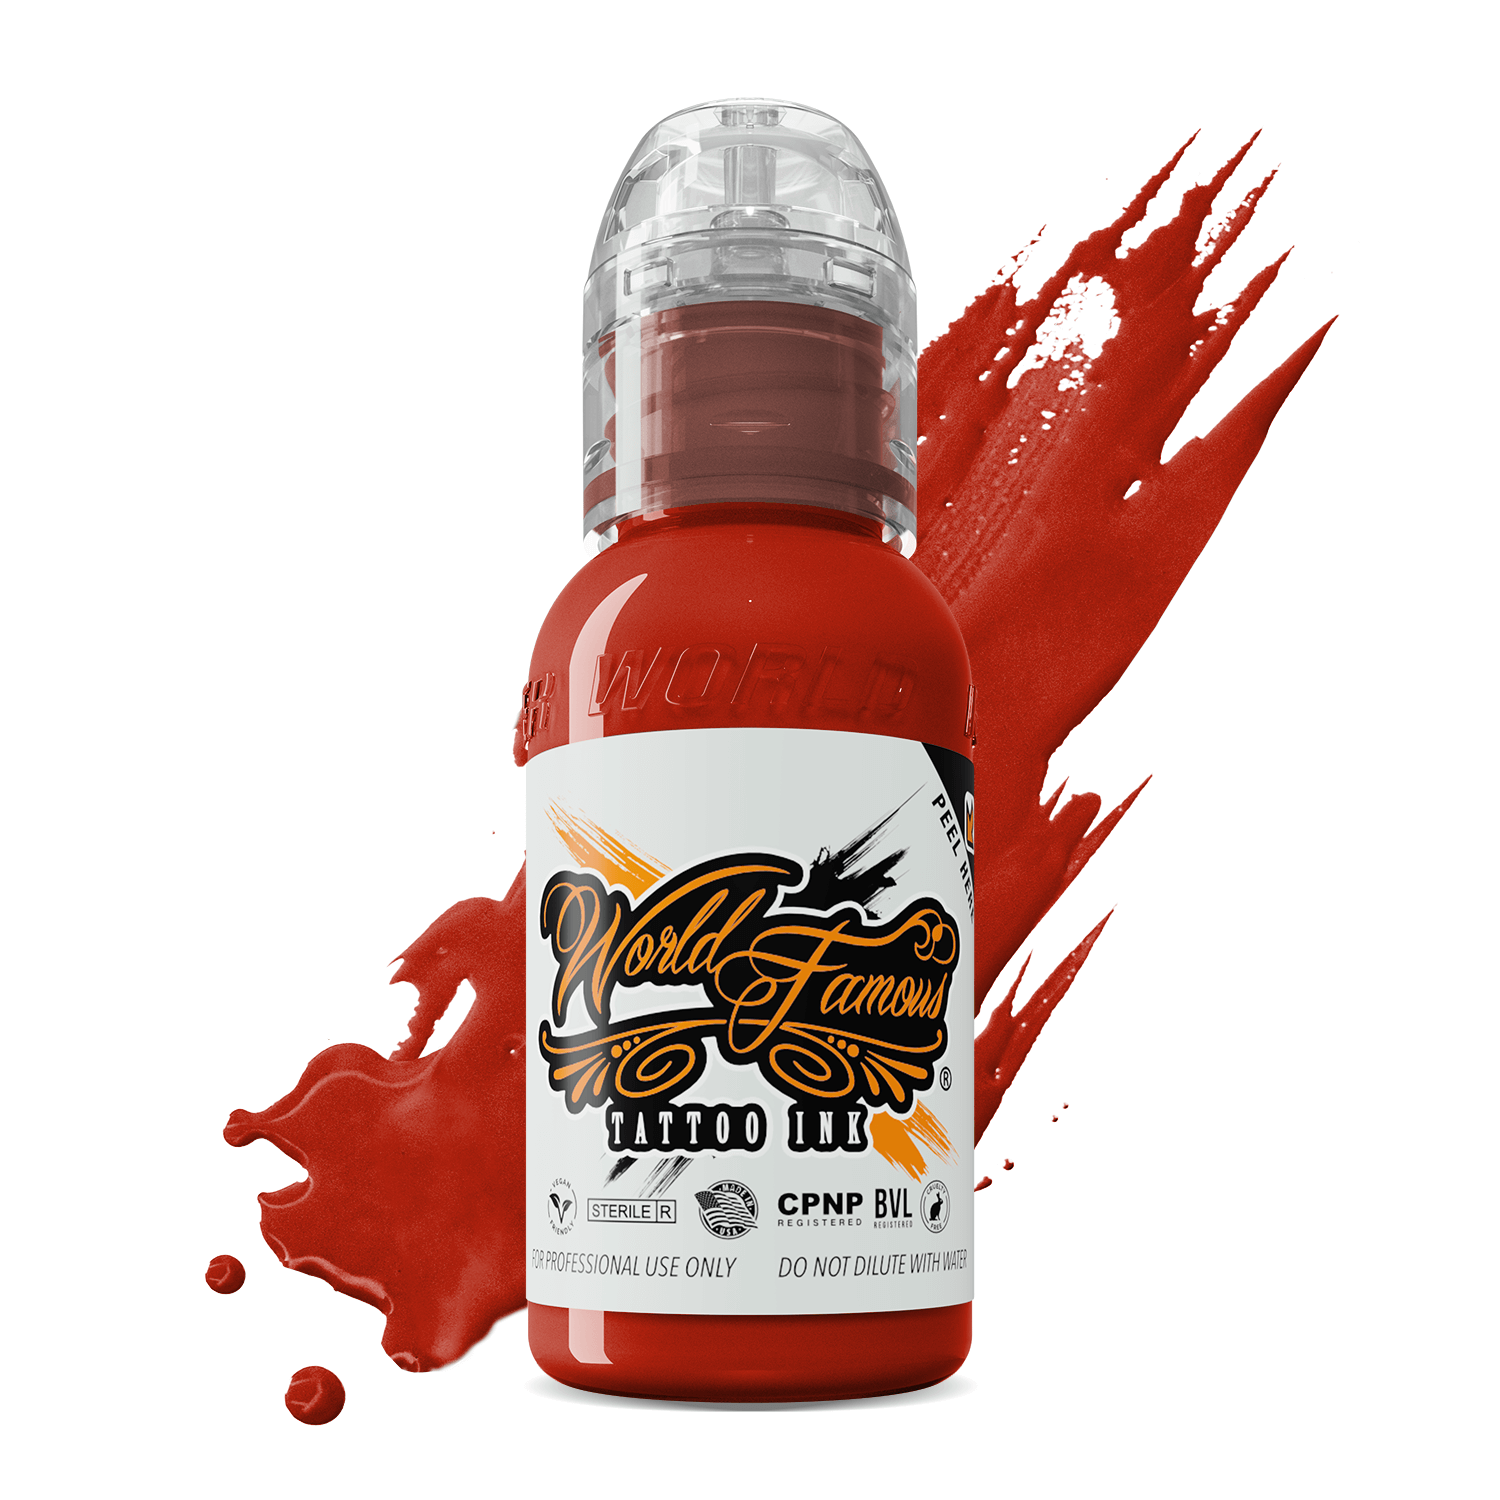 WFRCP1 World Famous Red Hot Chili Pepper 1oz